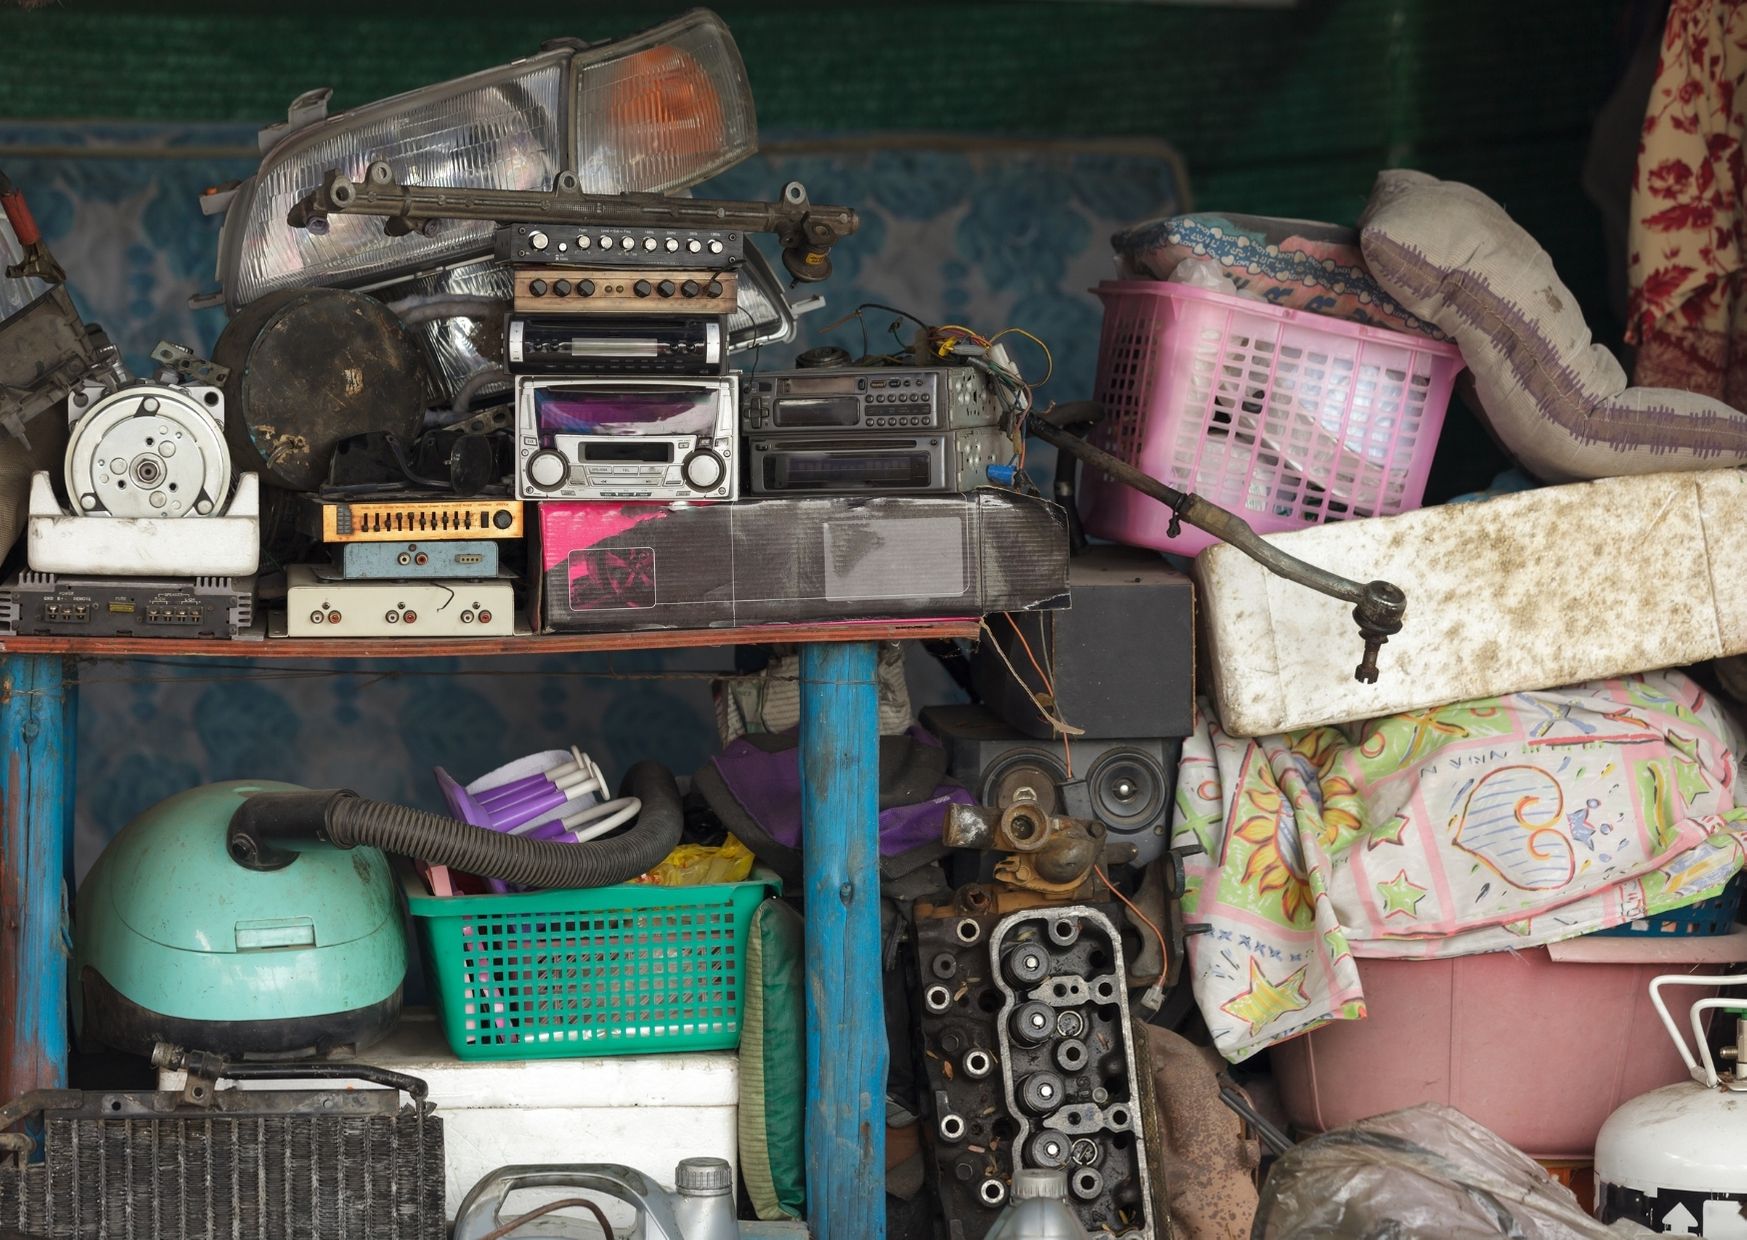 Pile of junk and waste in a shed